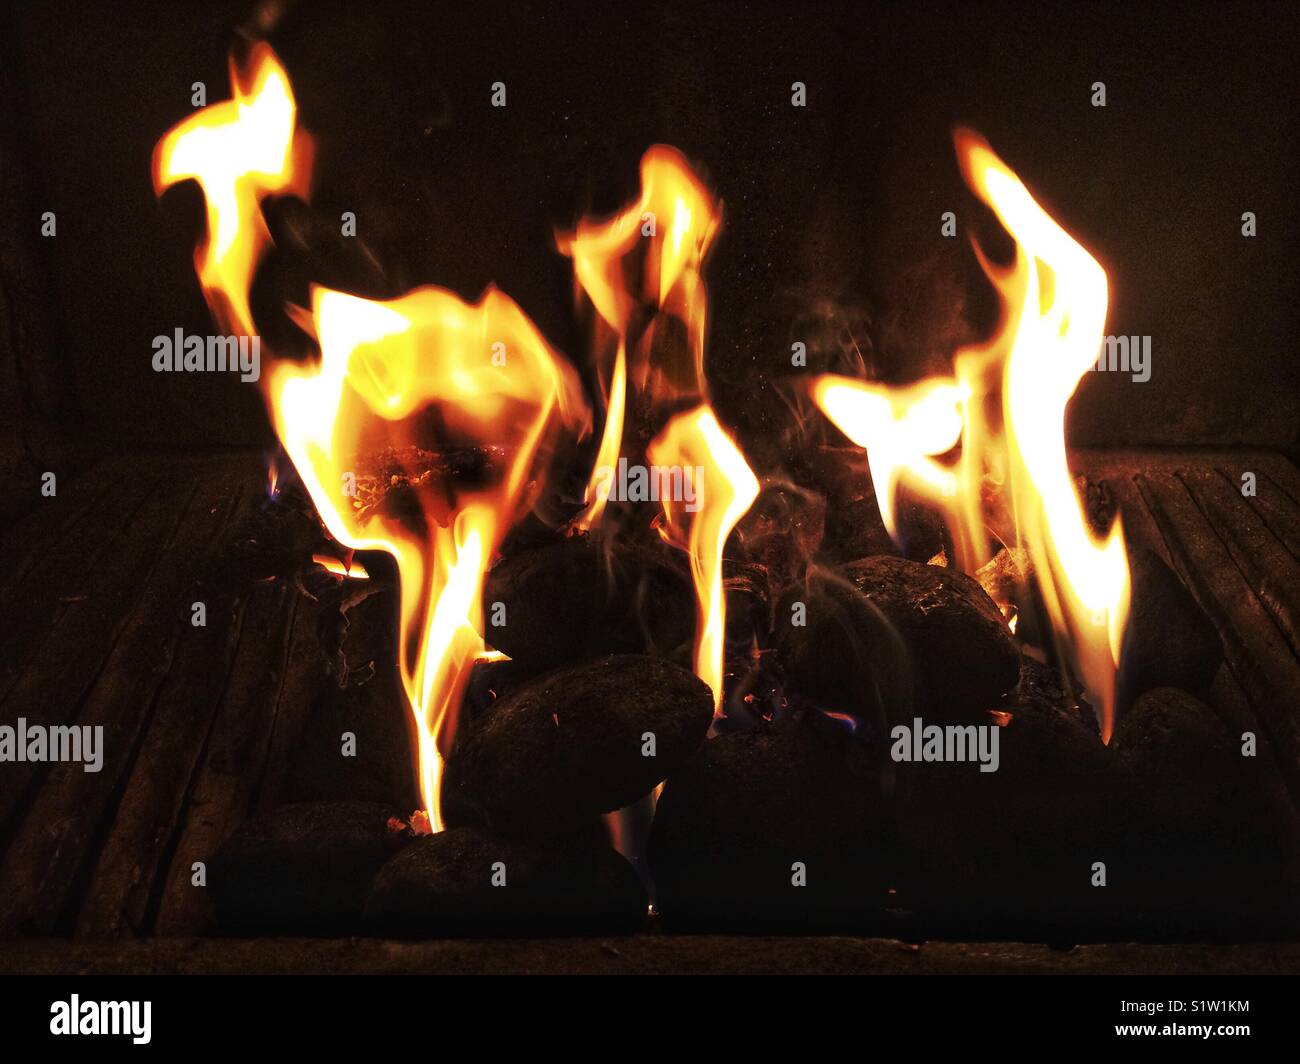 Dancing flames in an open fire place. Stock Photo